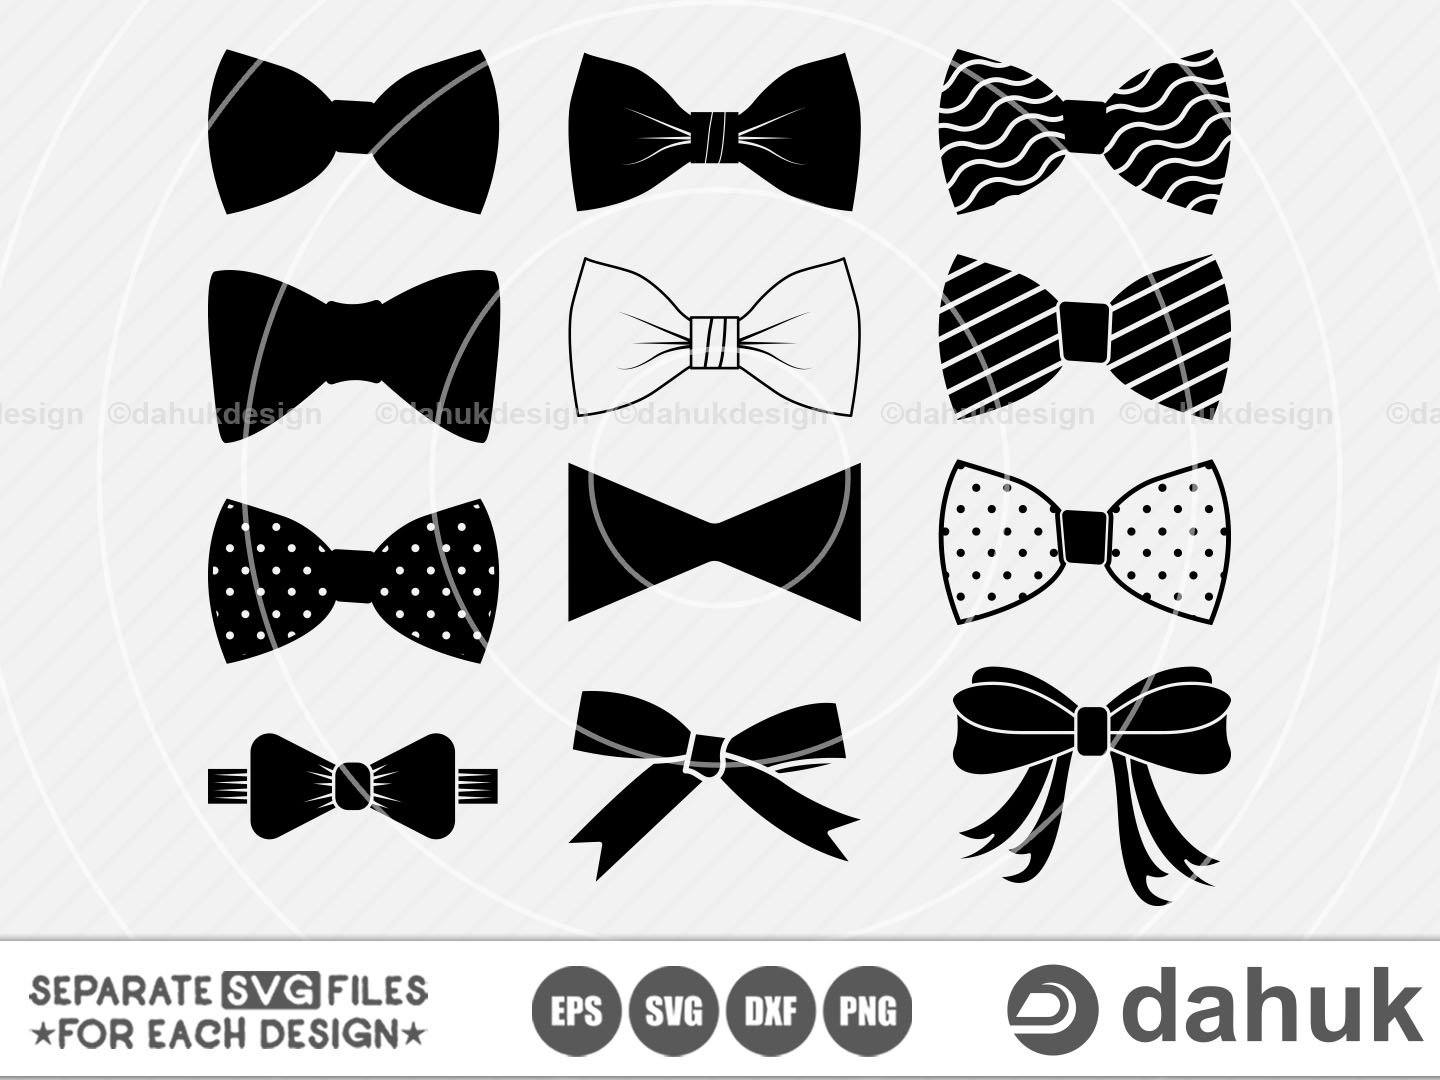 Download Bow Svg Design Cutting File Also Includes Png For Cricut Design Space And Silhouette Studio Commercial Use Scrapbooking Embellishments Leadcampus Org